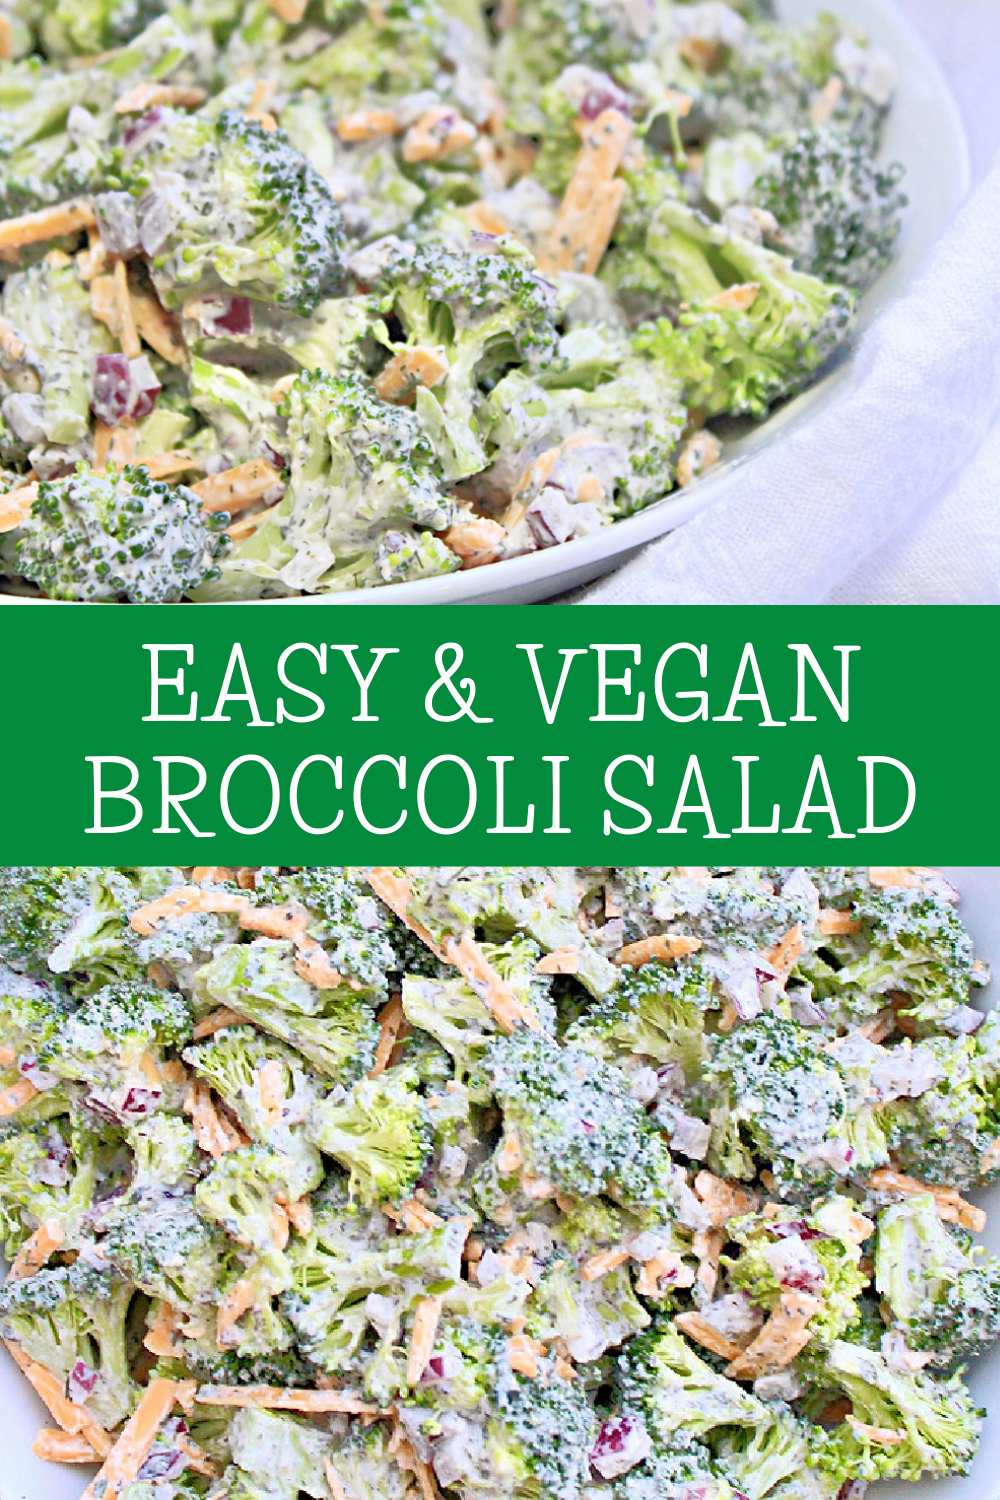 Broccoli Salad ~ A creamy and crunchy, simple and classic, broccoli salad with homemade dairy-freee ranch dressing. Minimal prep and no cooking required! via @thiswifecooks